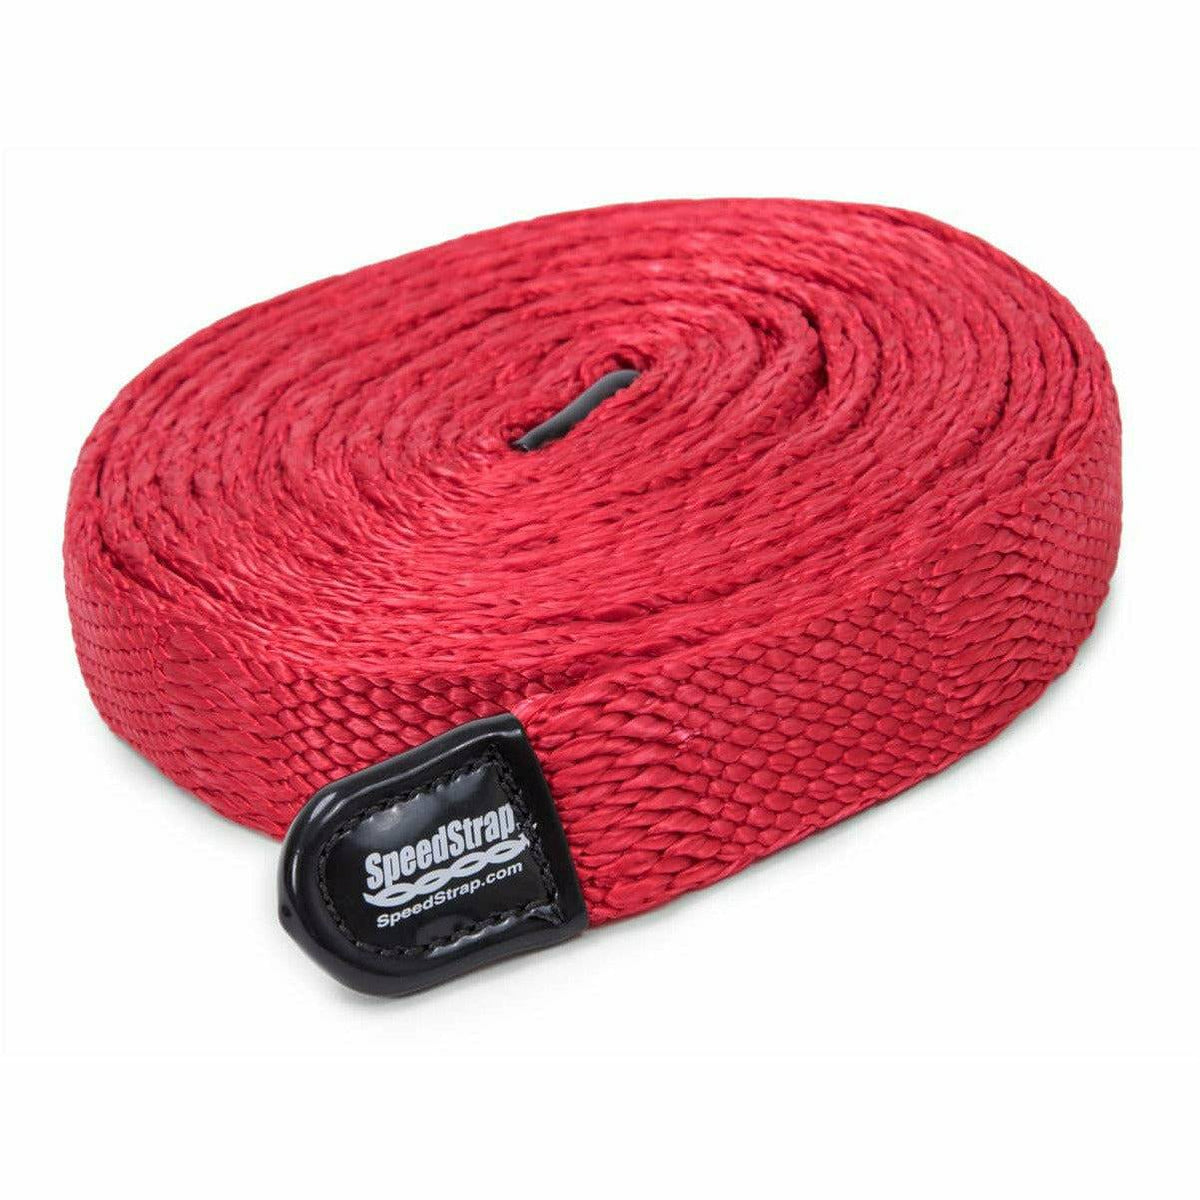 Speed Strap 1" Weavable Recovery Strap